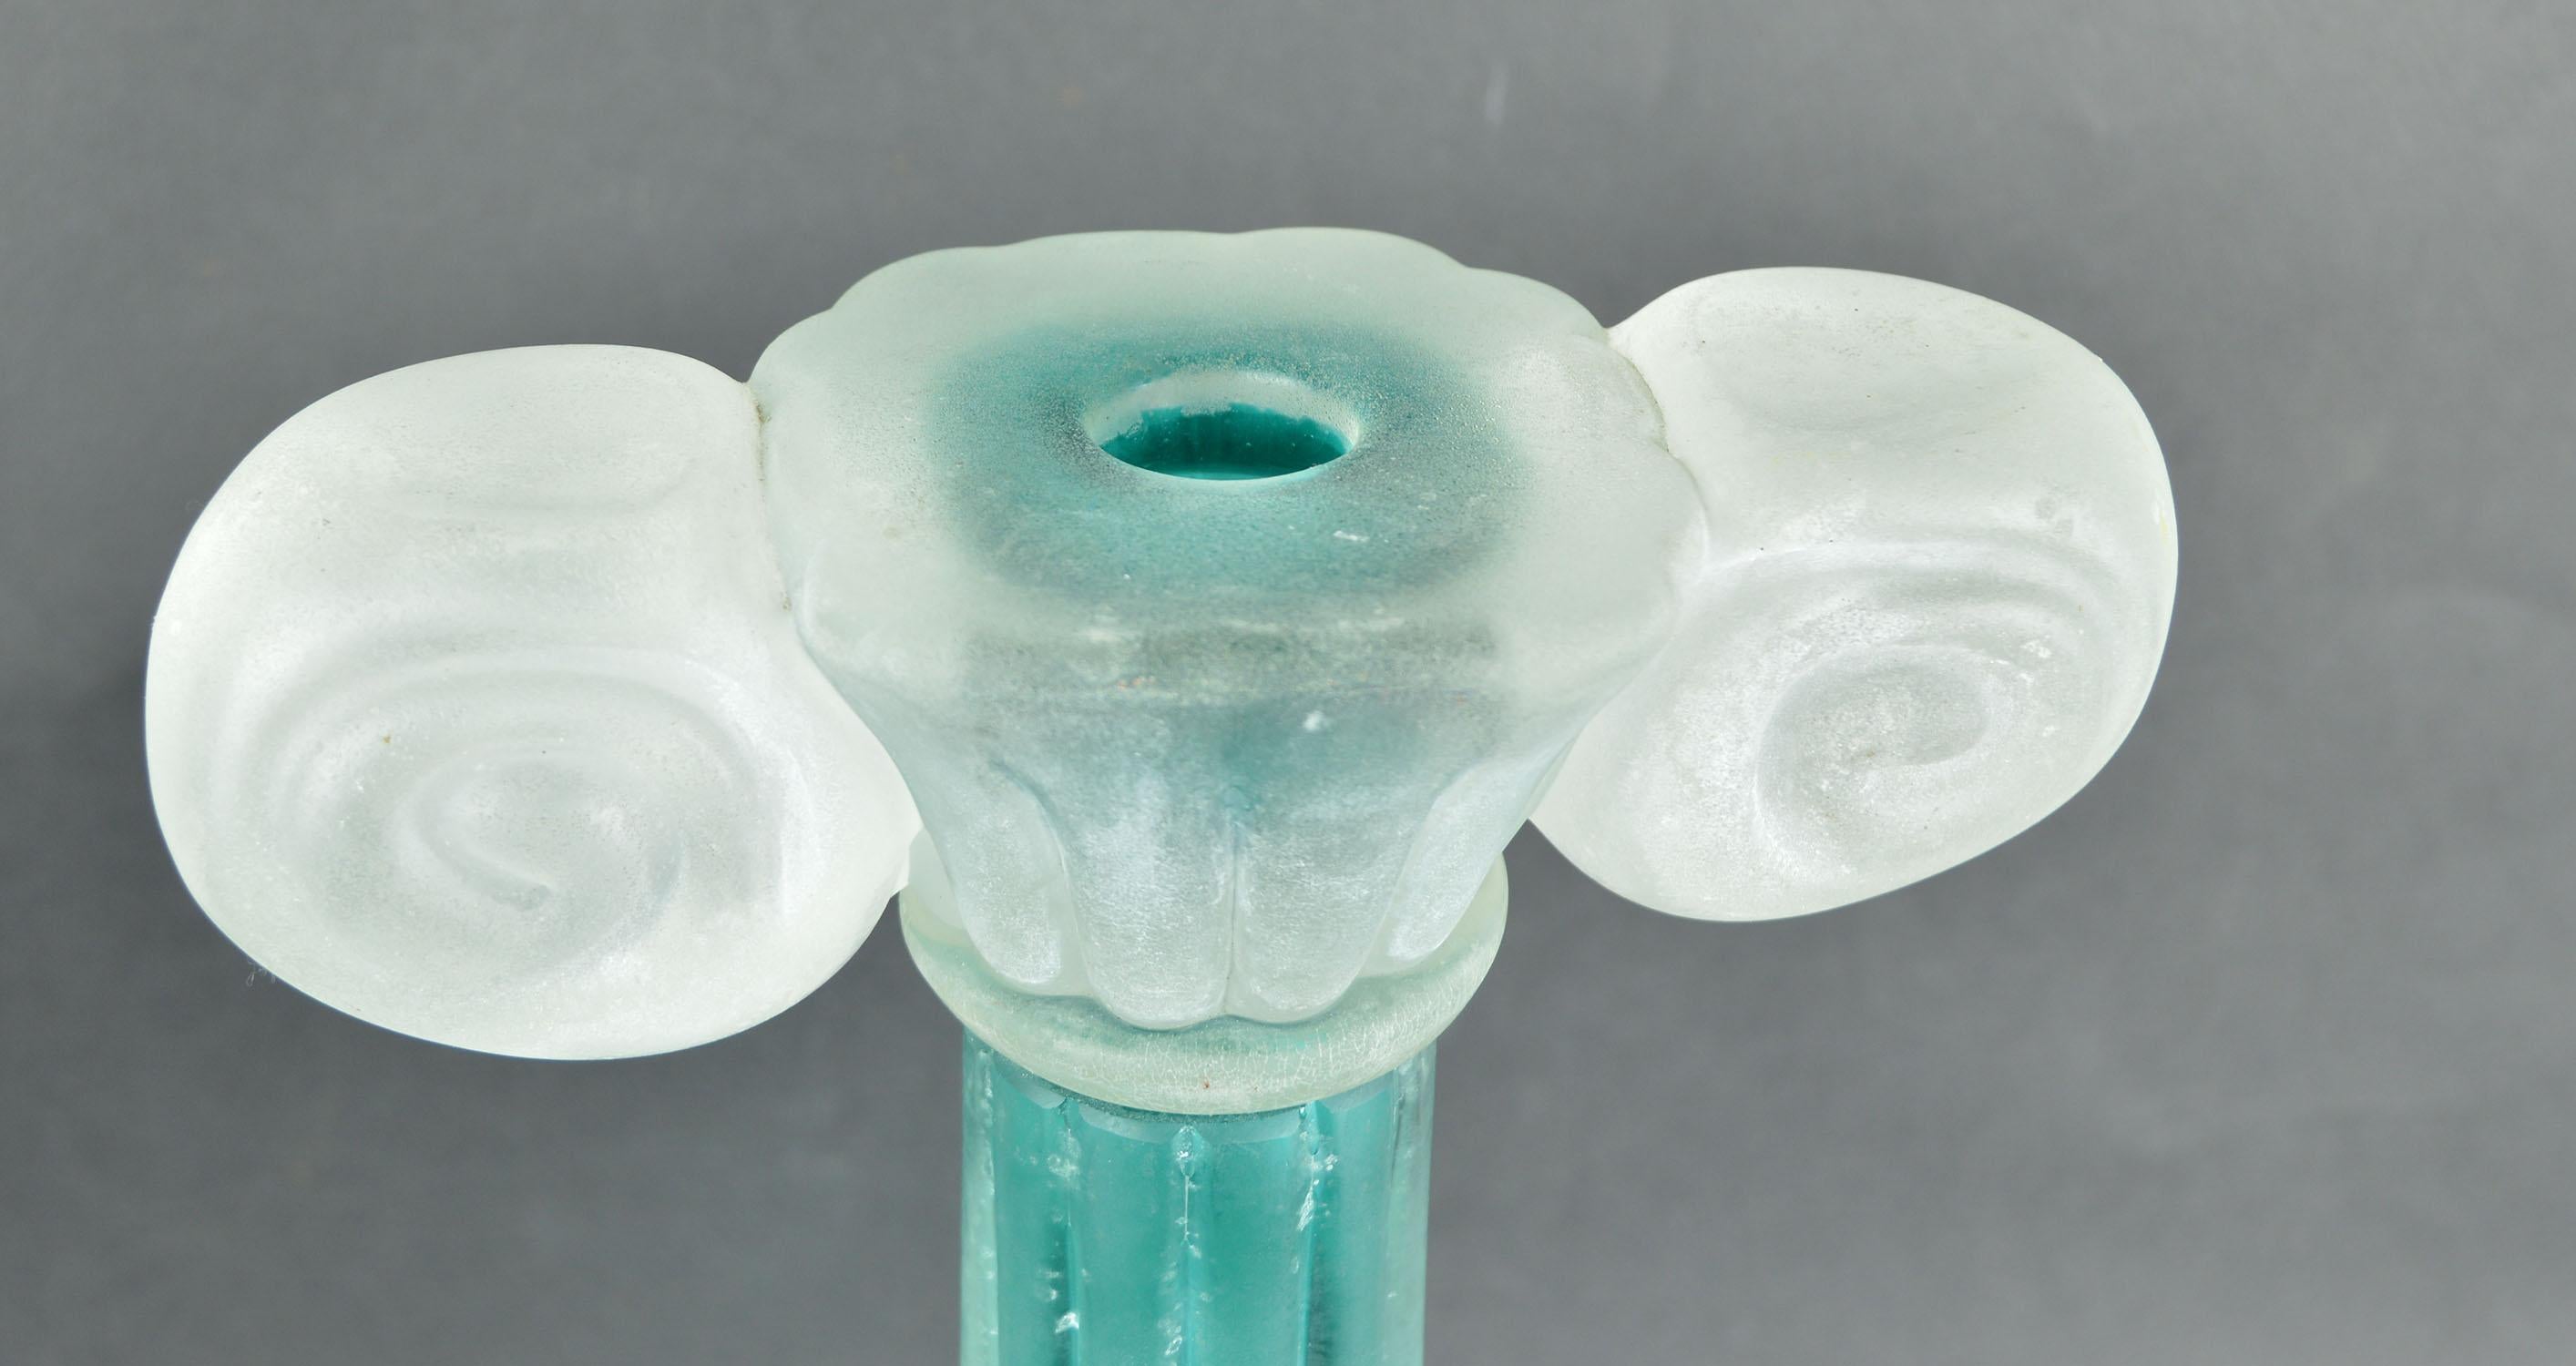 Classical Greek Midcentury Murano Glass Column Candlestick, Signed Cenedese, Venice, 1950s